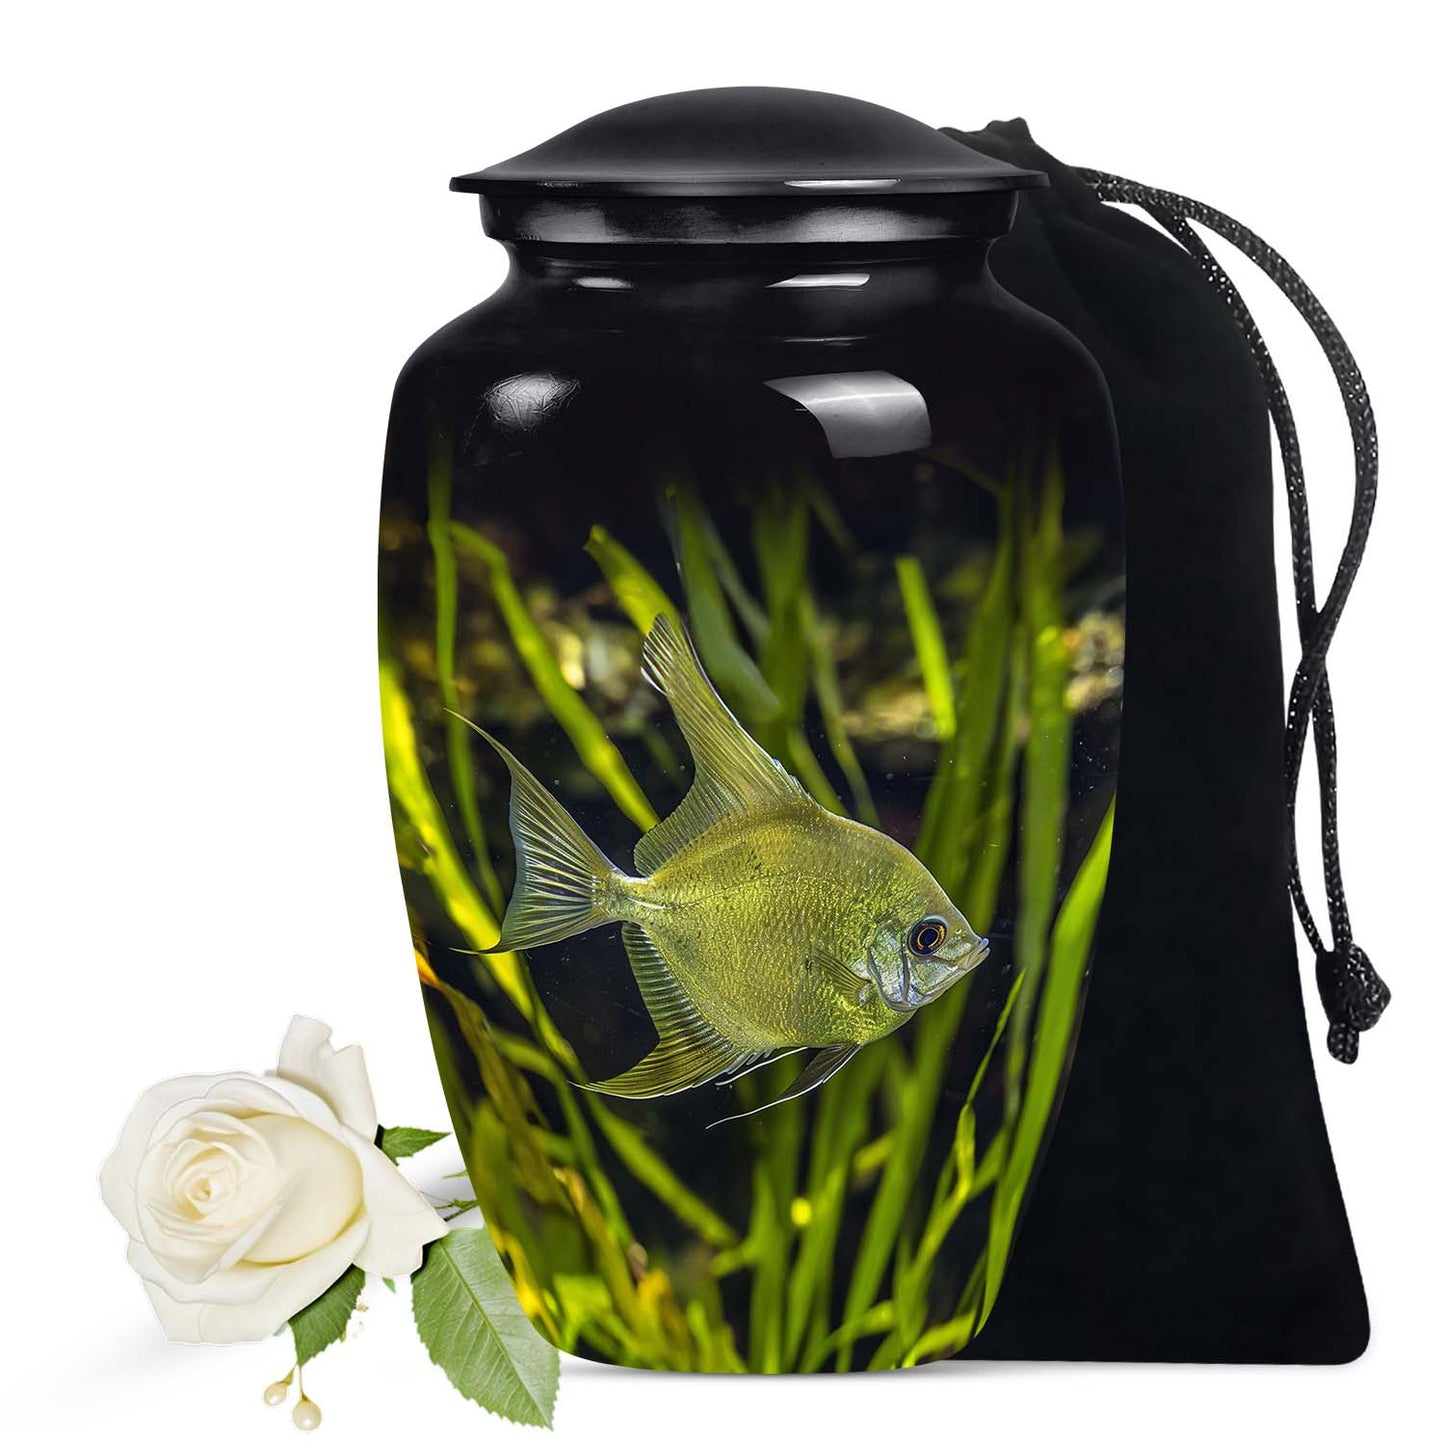 Large Verdant Depths Angelfish Urn for cremation remains, a unique choice in fish-themed human cremation urns